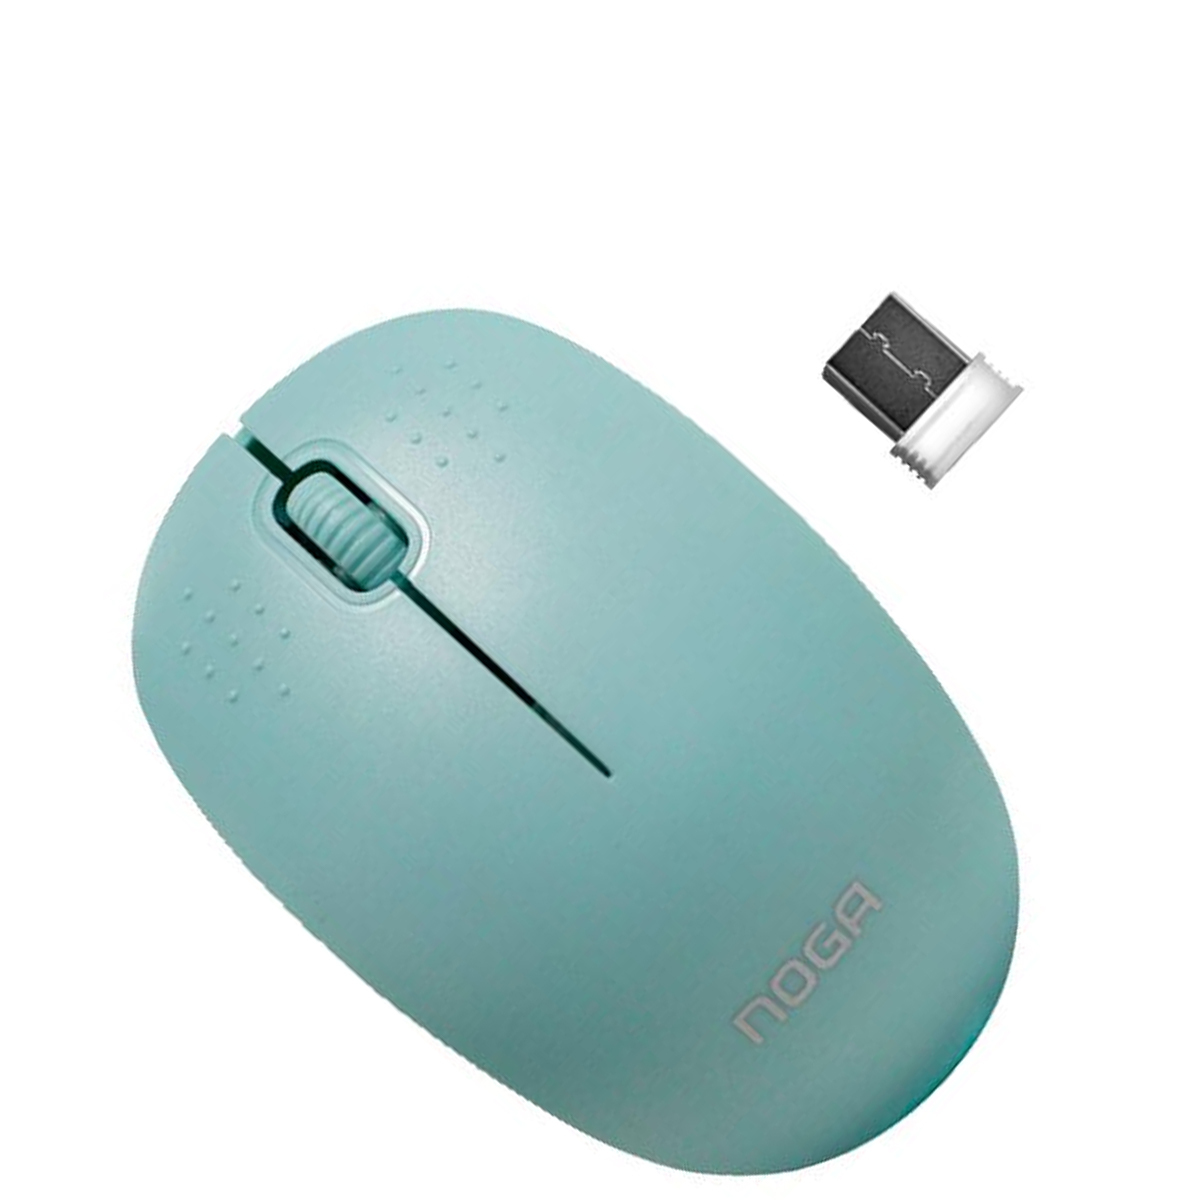 MOUSE WIRE NOGA NG900 VERDE